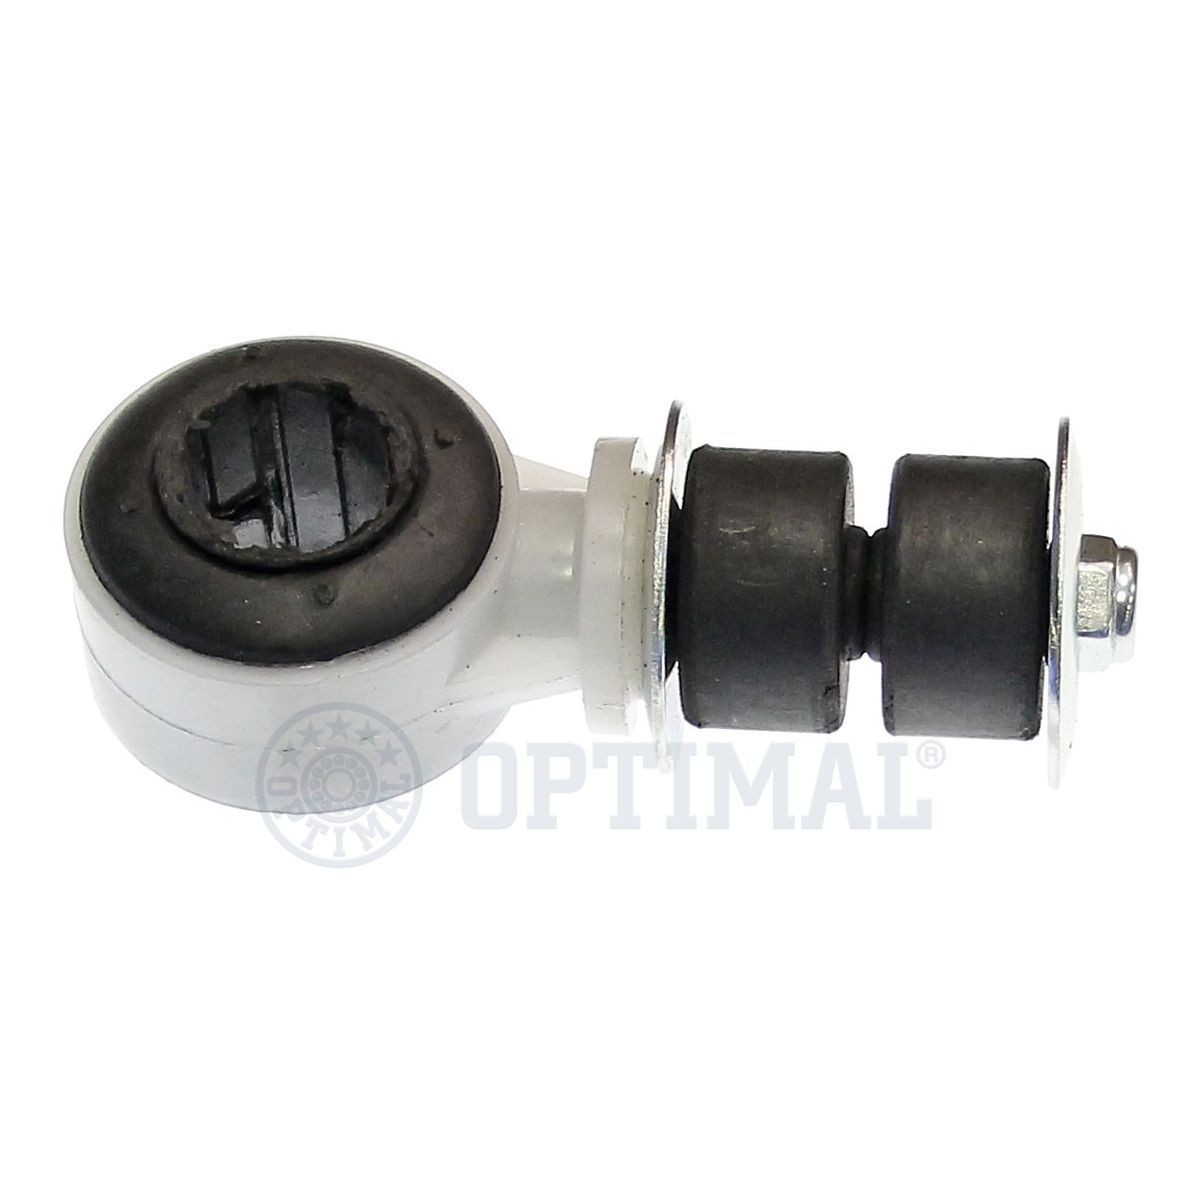 5-0260 OPTIMAL Front Axle Left, Front Axle Right, 85mm Length: 85mm Drop link G7-680 buy